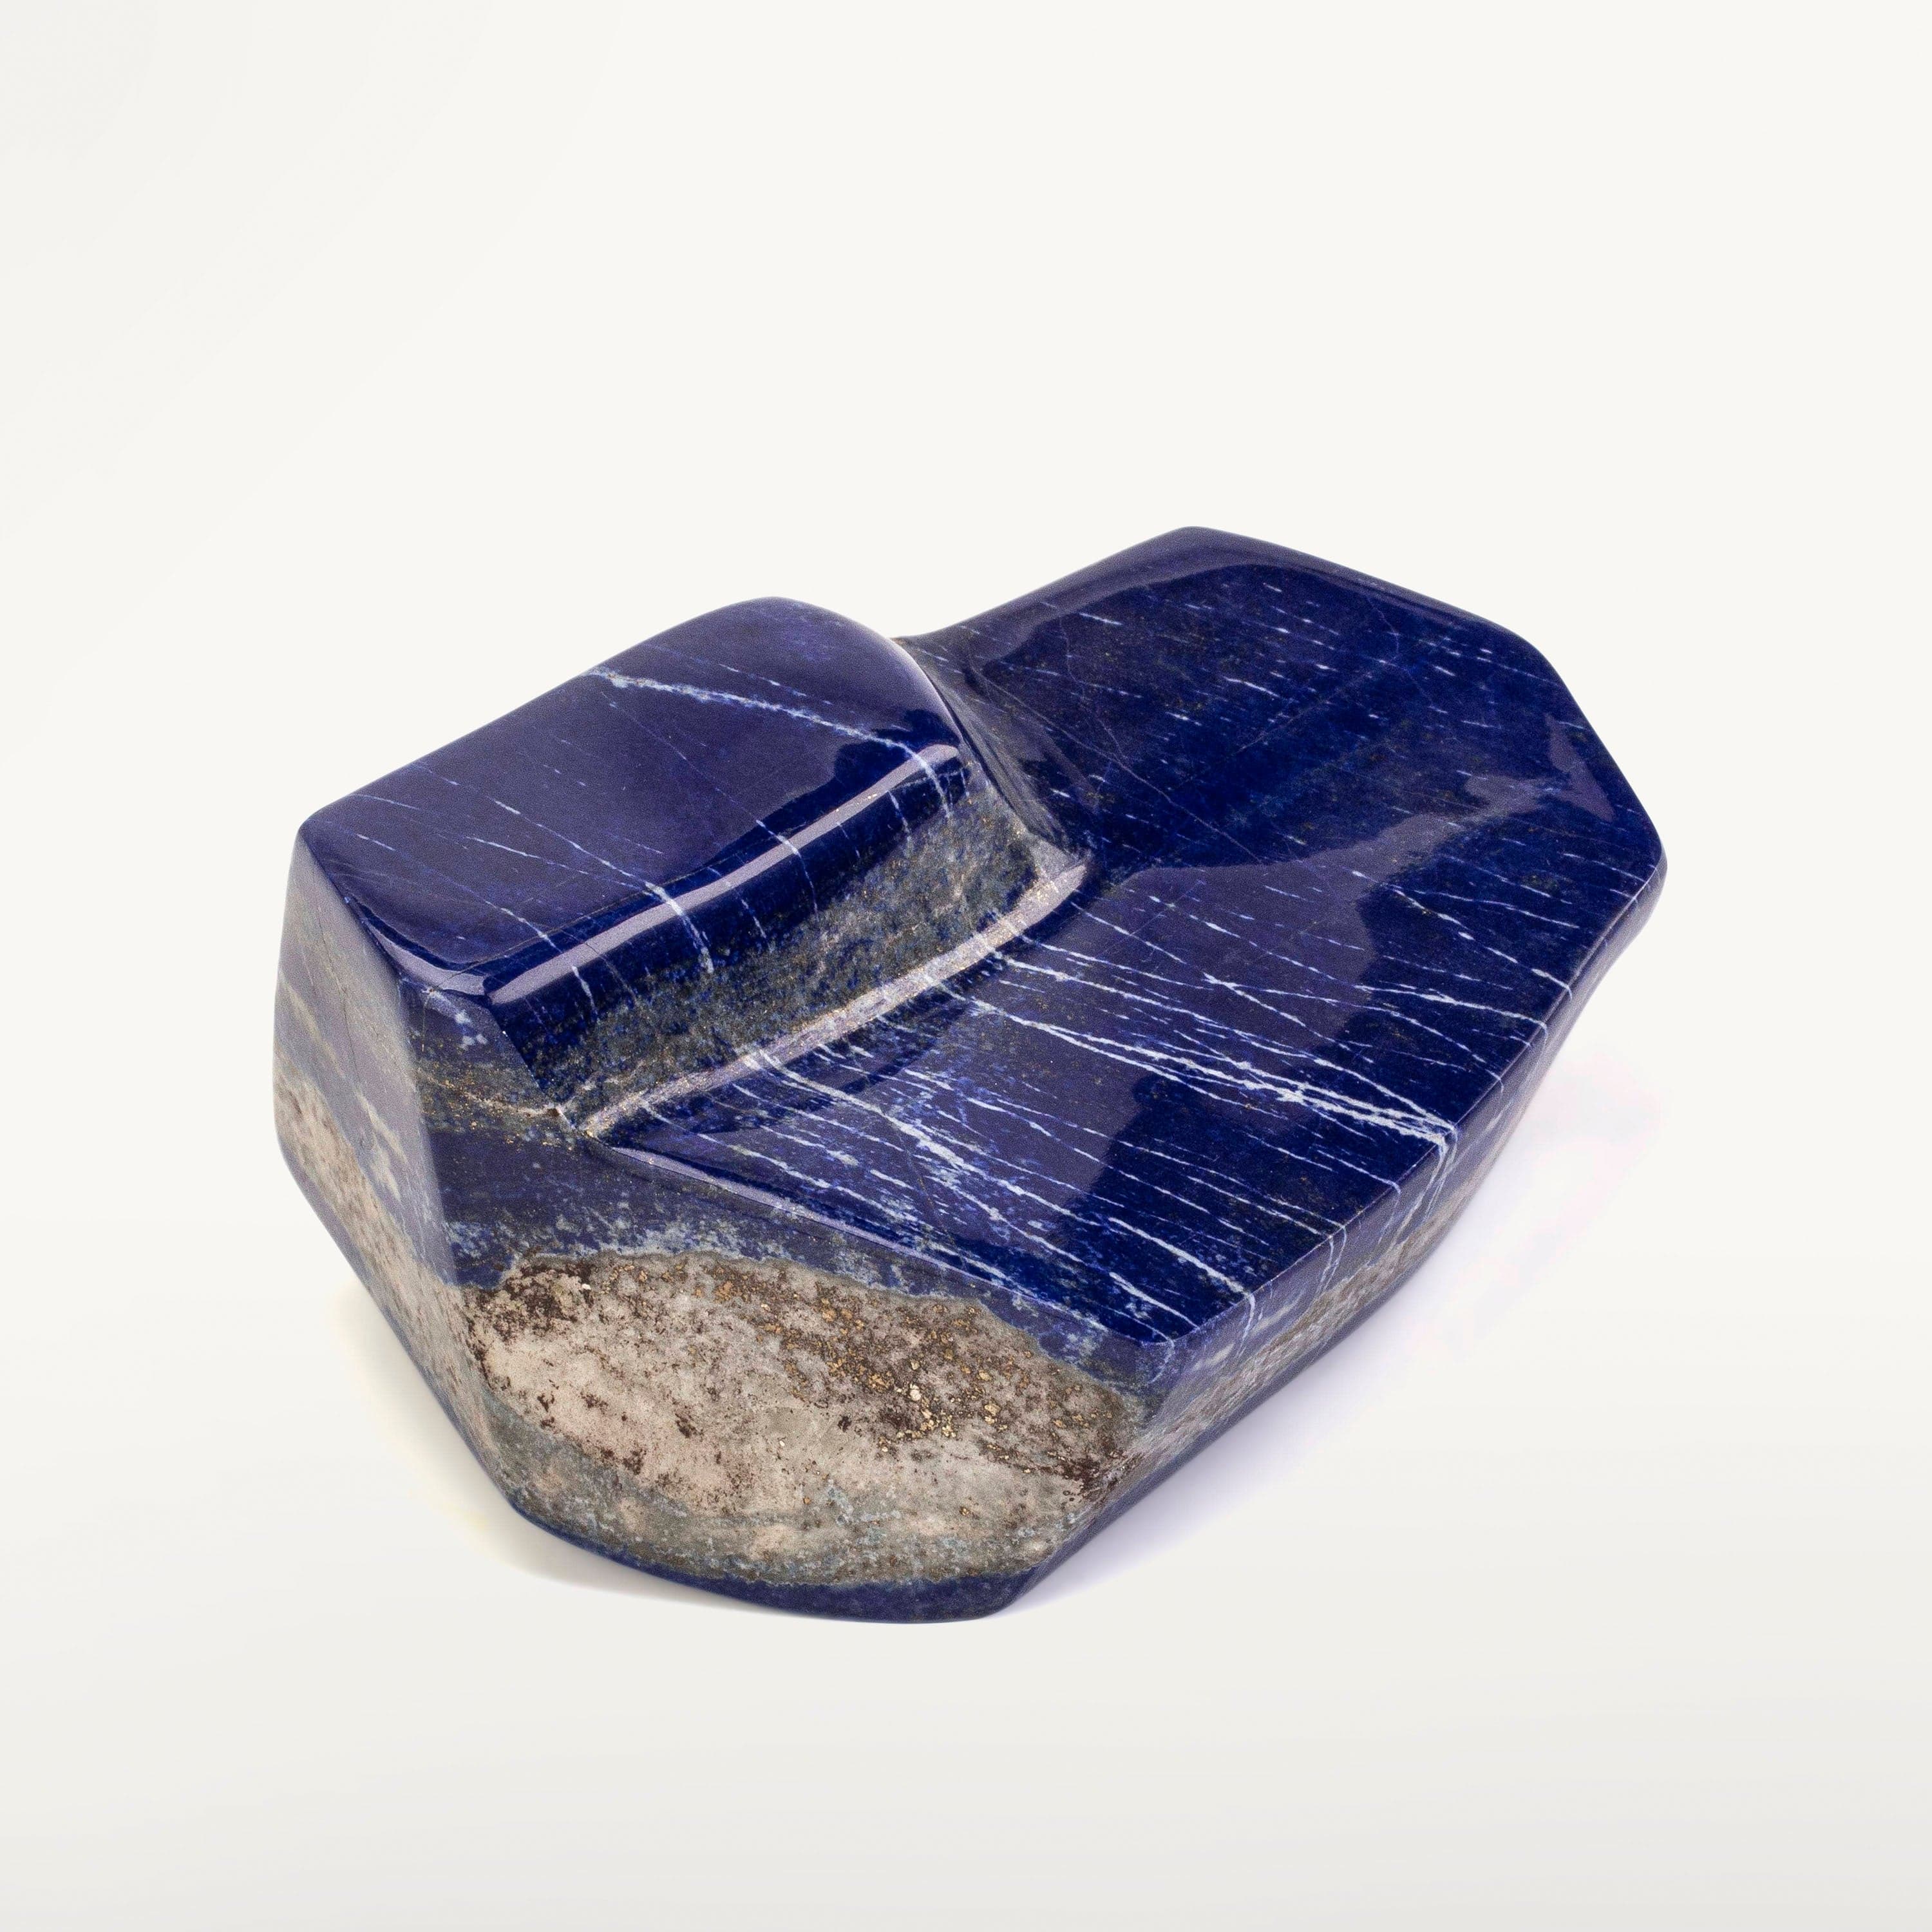 Kalifano Lapis Lapis Lazuil Freeform from Afghanistan - 920 g / 2 lbs LP1000.004